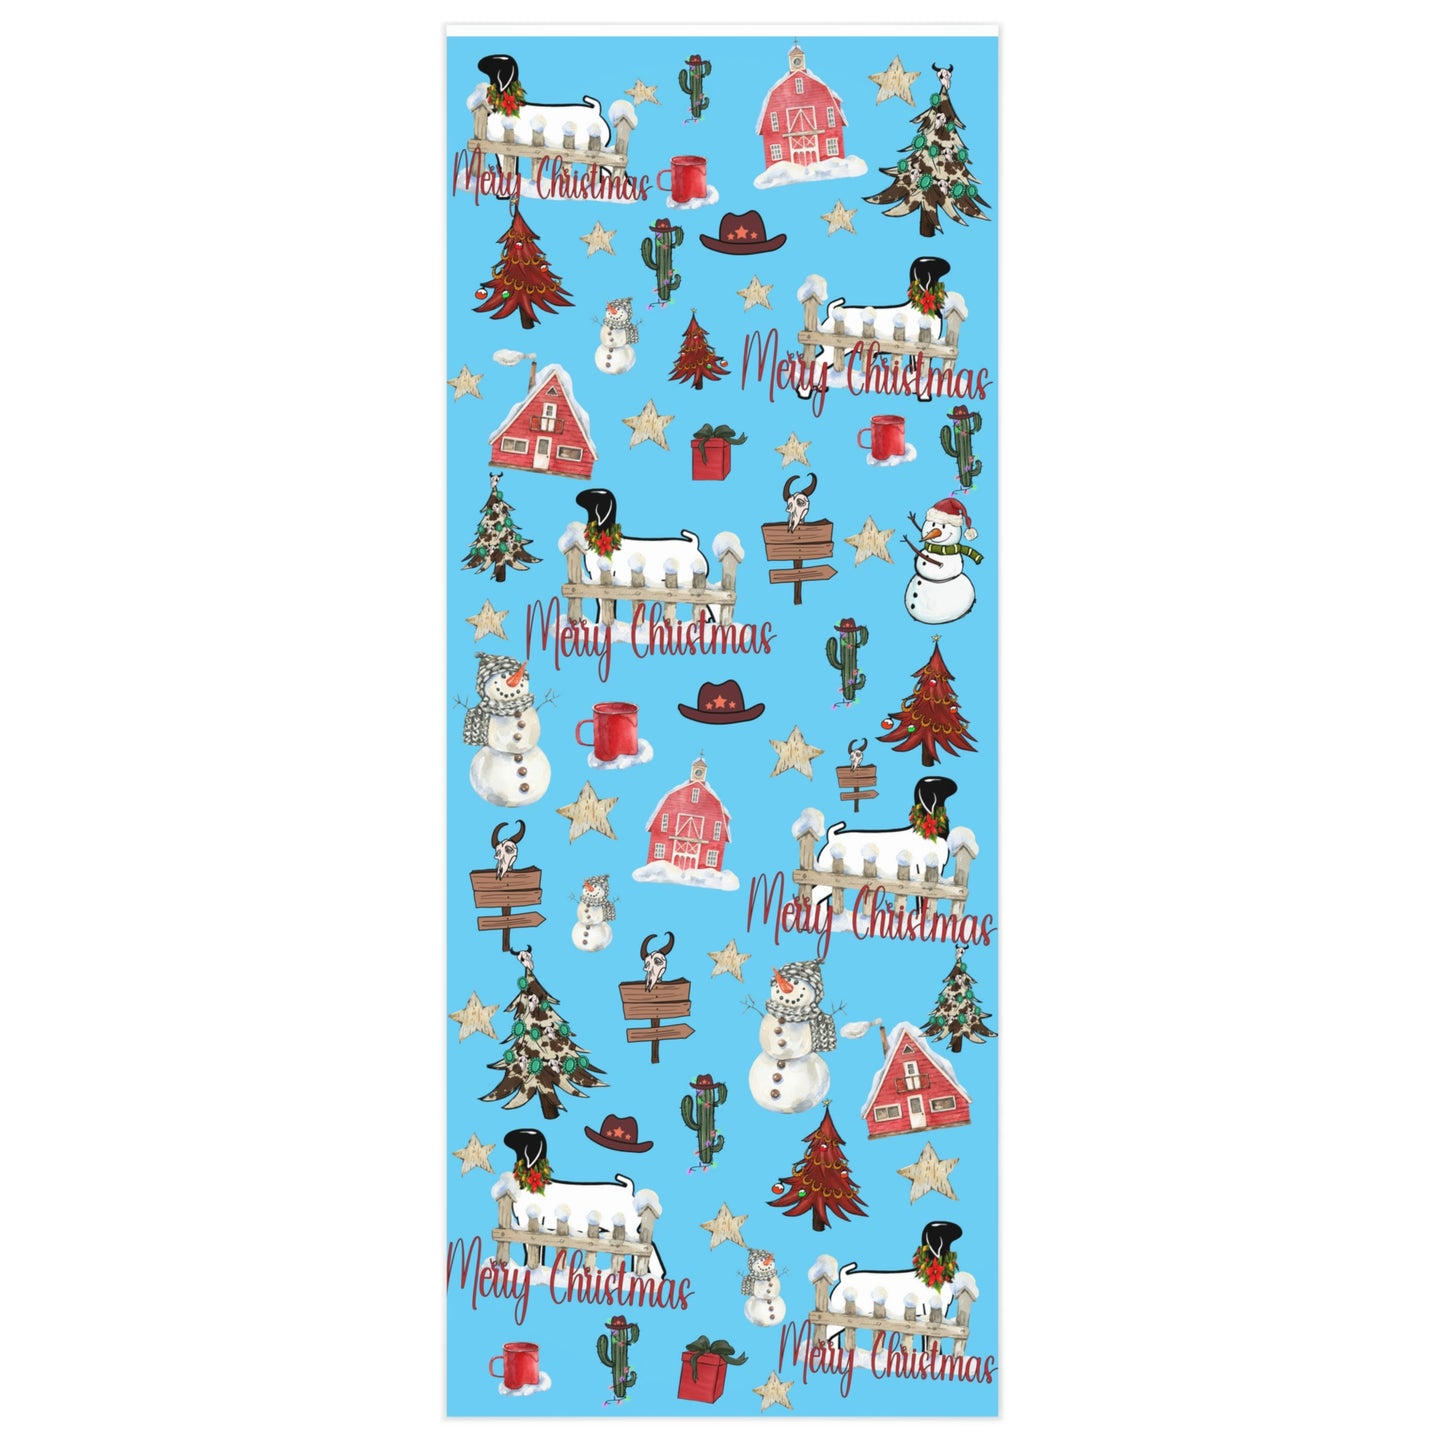 Merry Christmas Livestock Show Goat Wrapping Paper - Market Goat - 2'x5' Roll Paper - One-sided Print